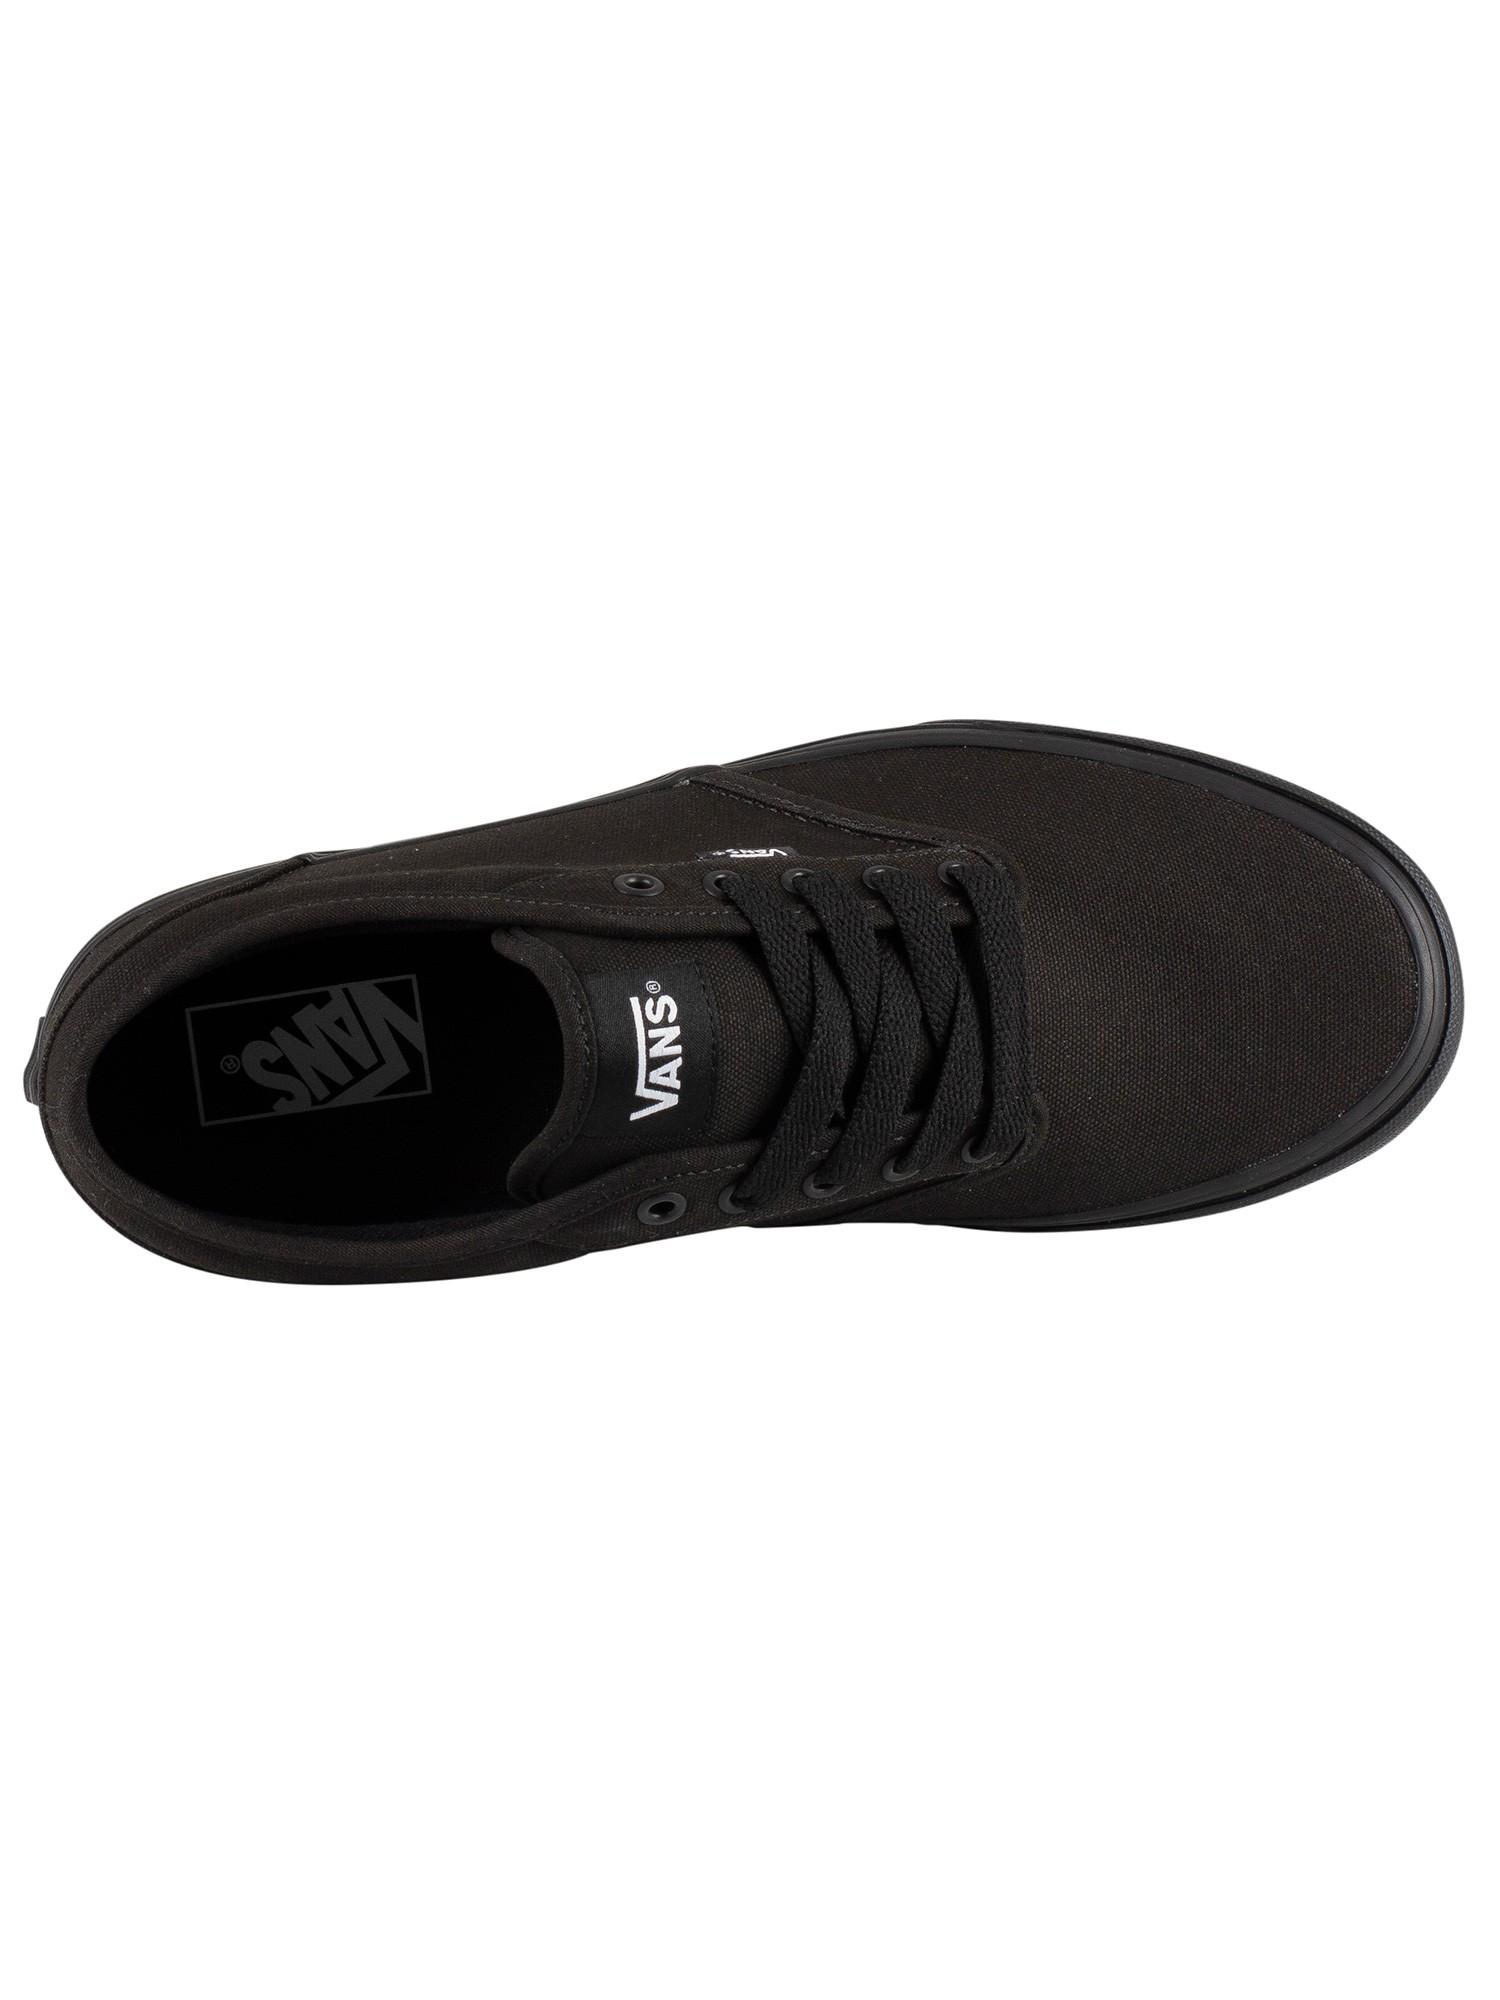 Vans Atwood Canvas Trainers in Black/Black (Black) for Men | Lyst